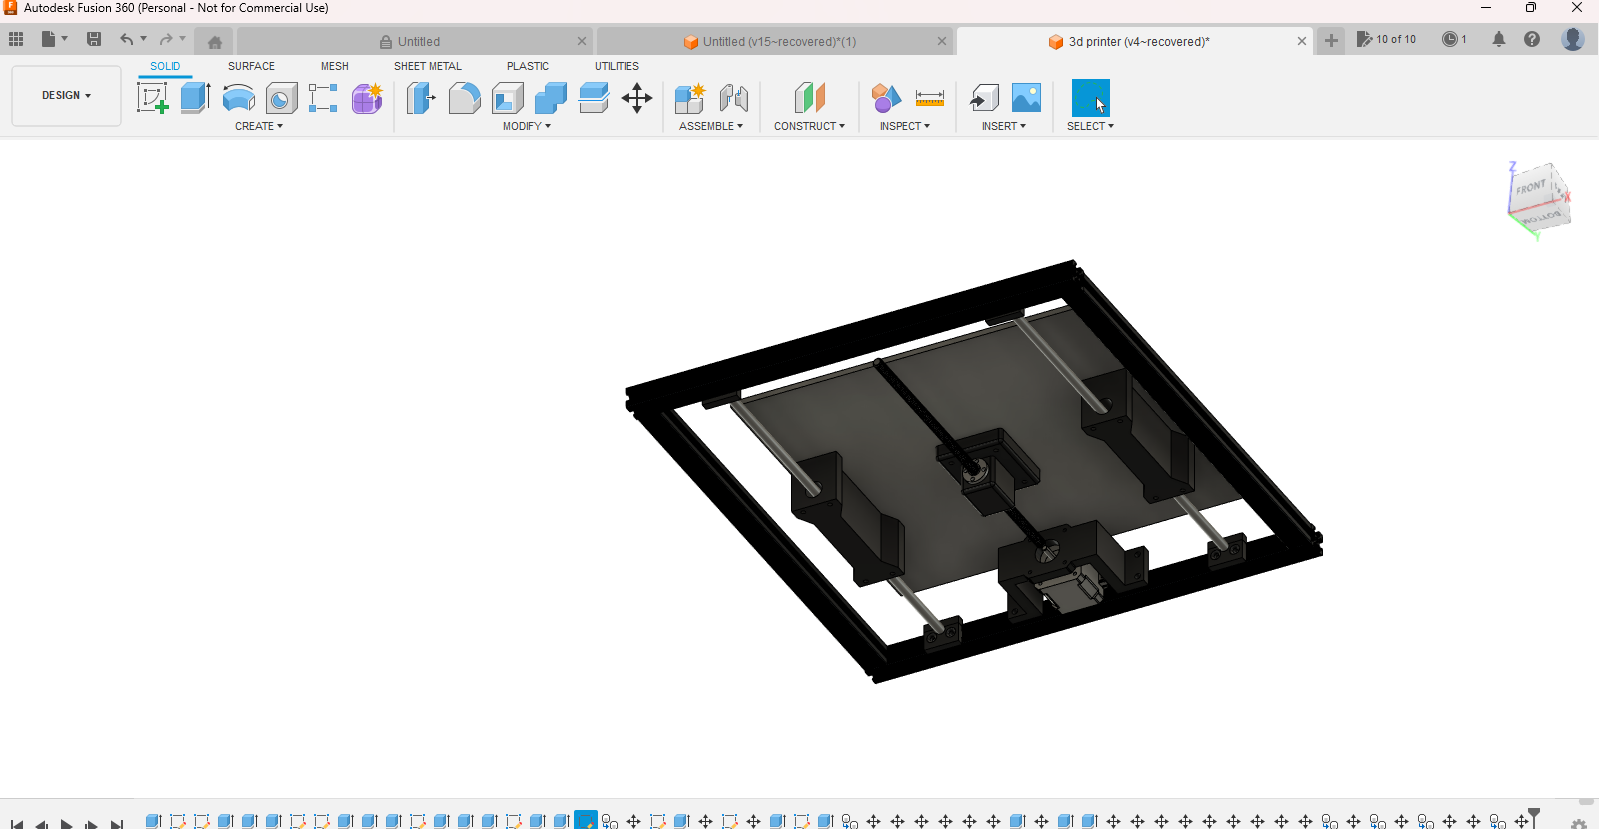 Autodesk Fusion 360 (Personal - Not for Commercial Use) 5_31_2023 7_43_48 PM.png